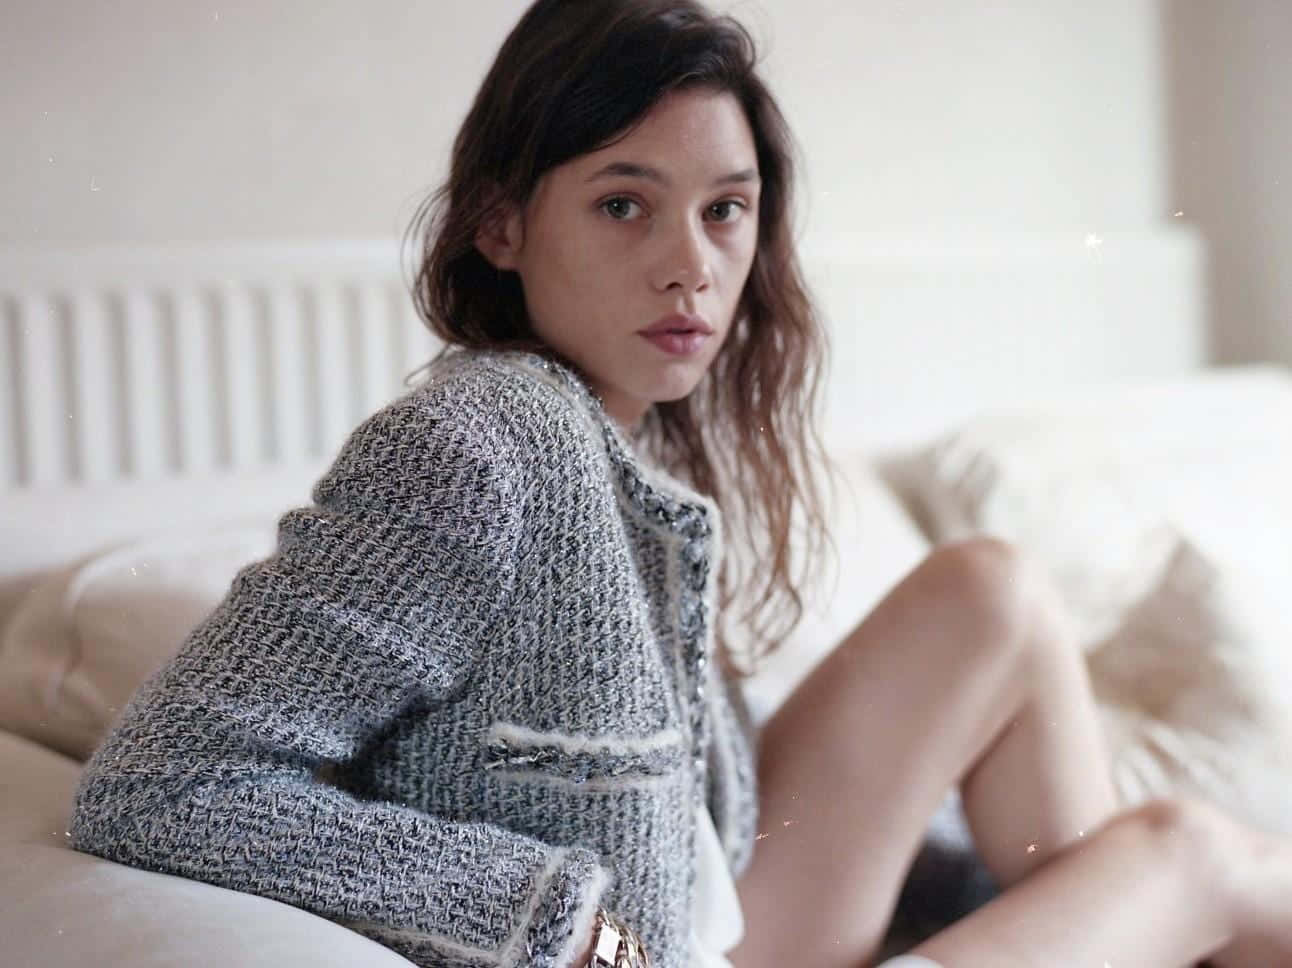 Astrid Berges-Frisbey posing for a portrait Wallpaper